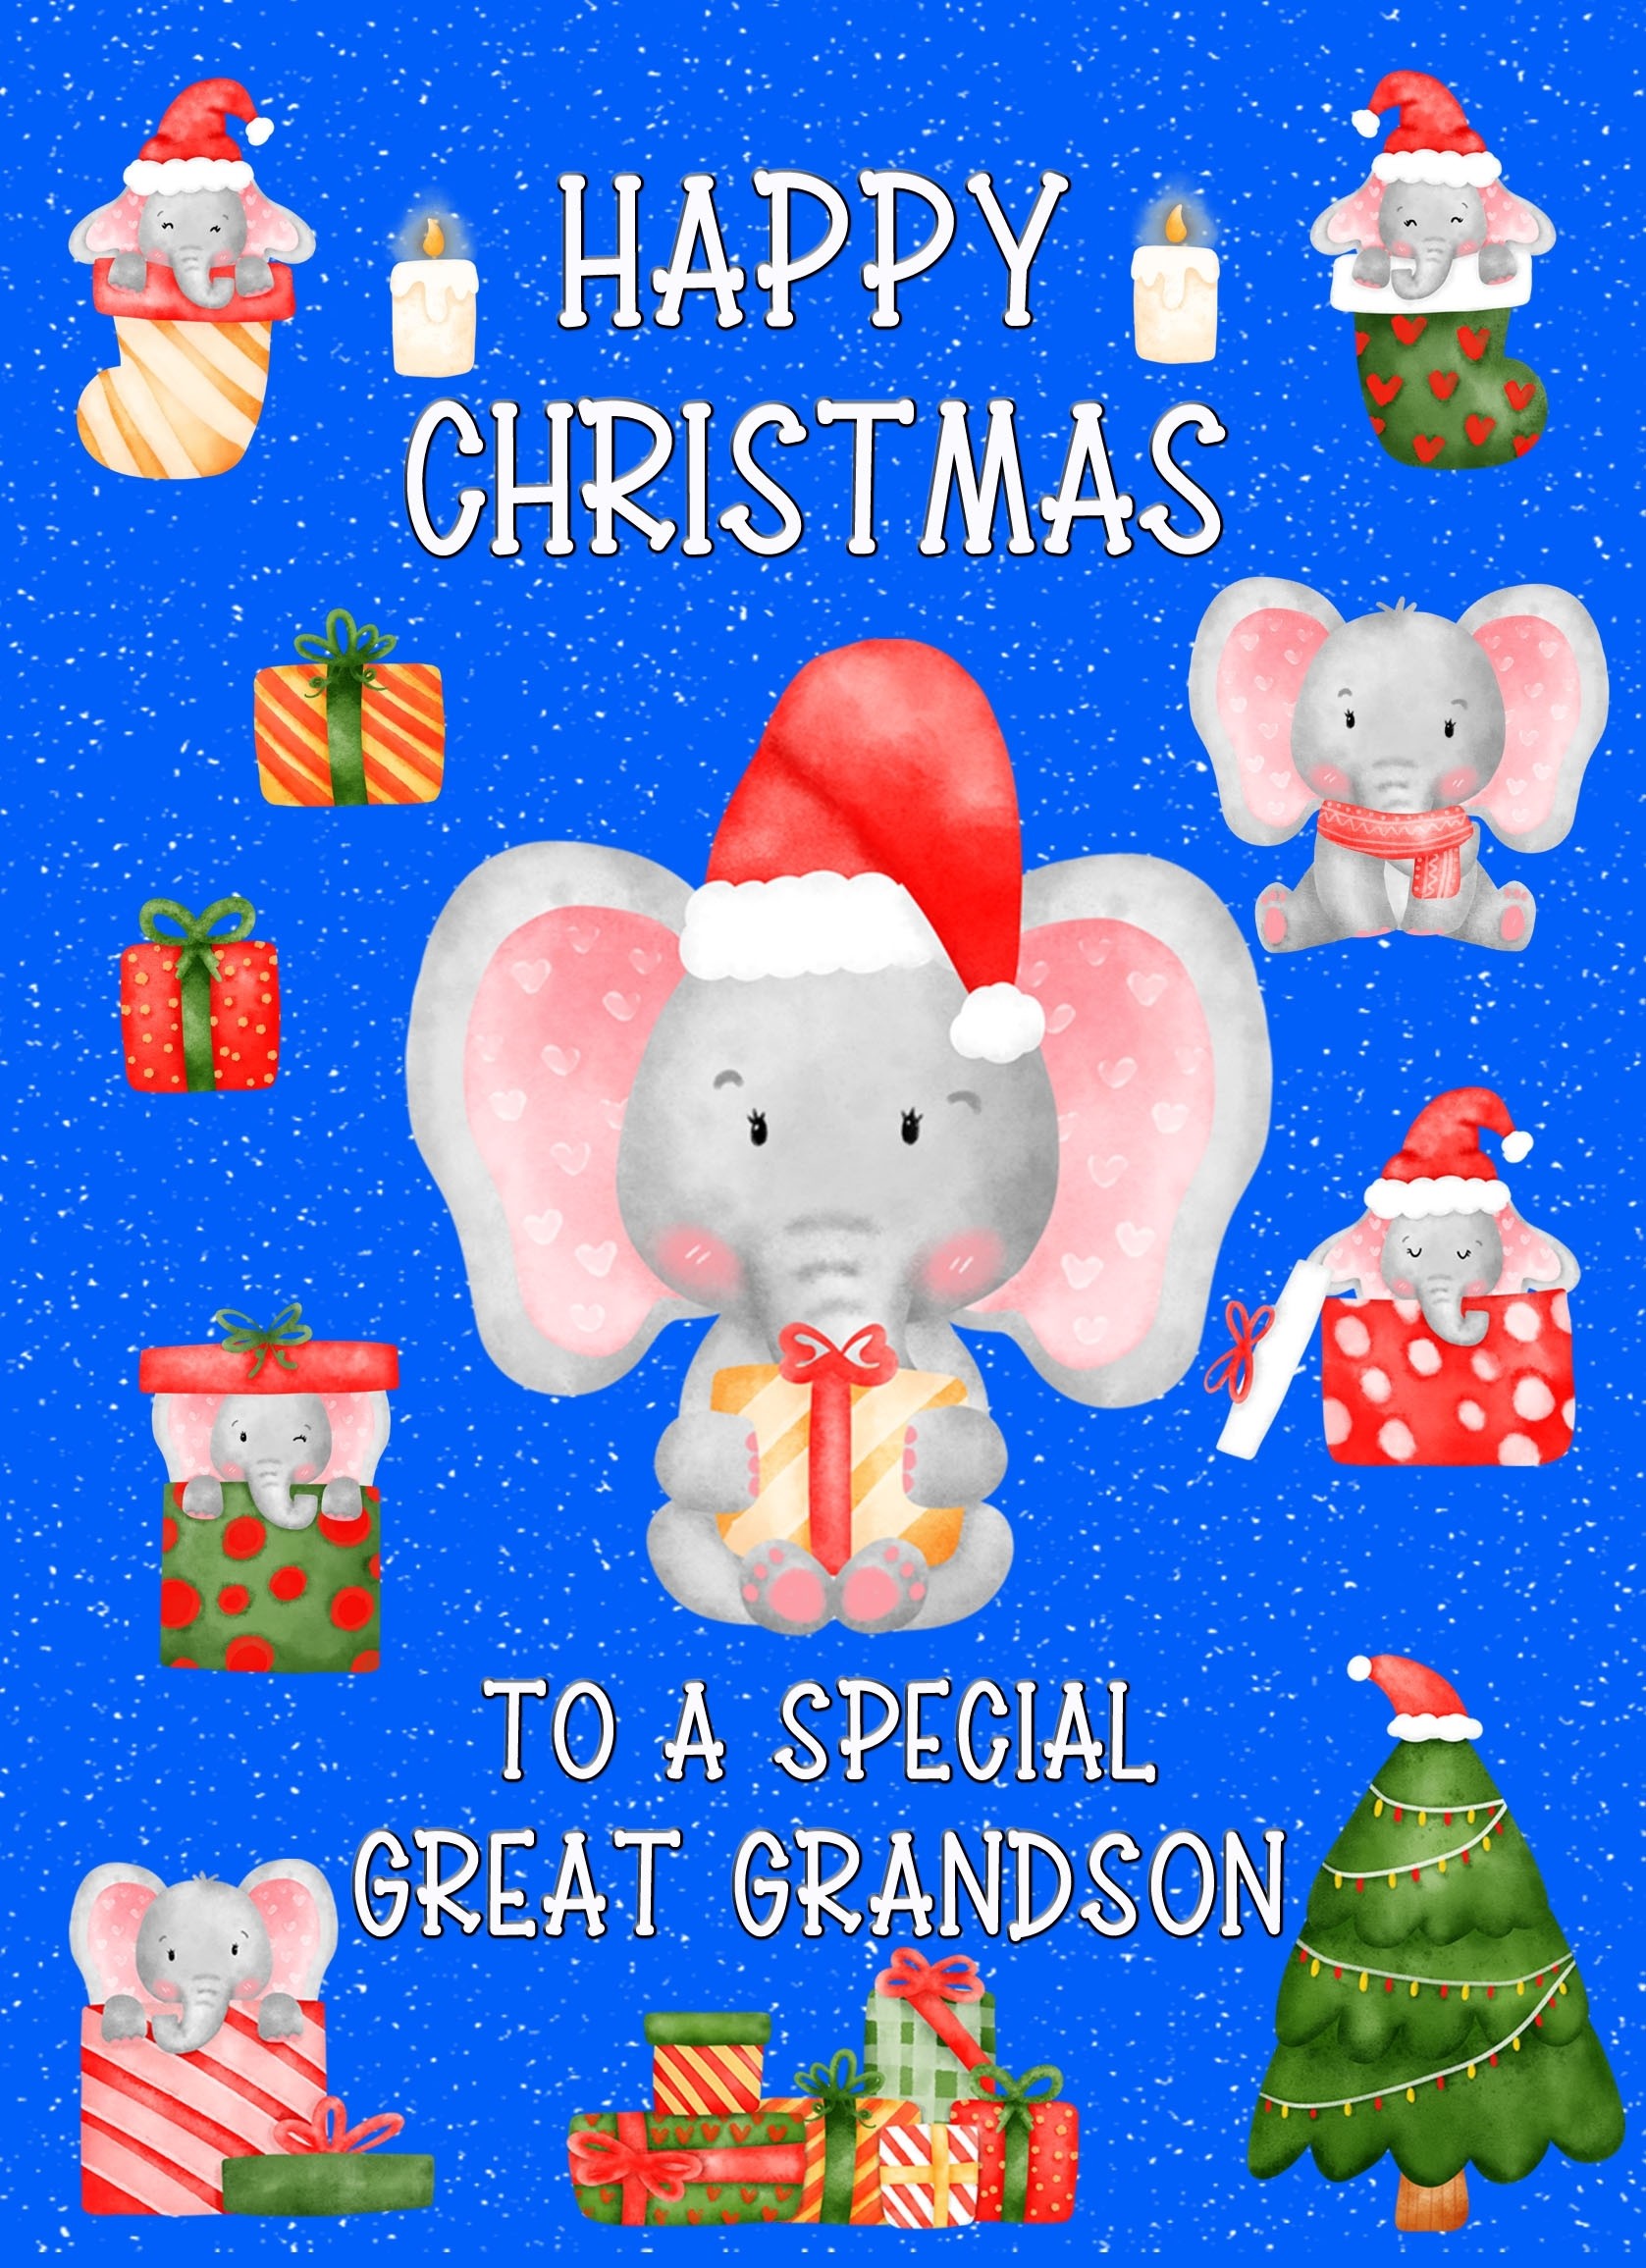 Christmas Card For Special Great Grandson (Blue)